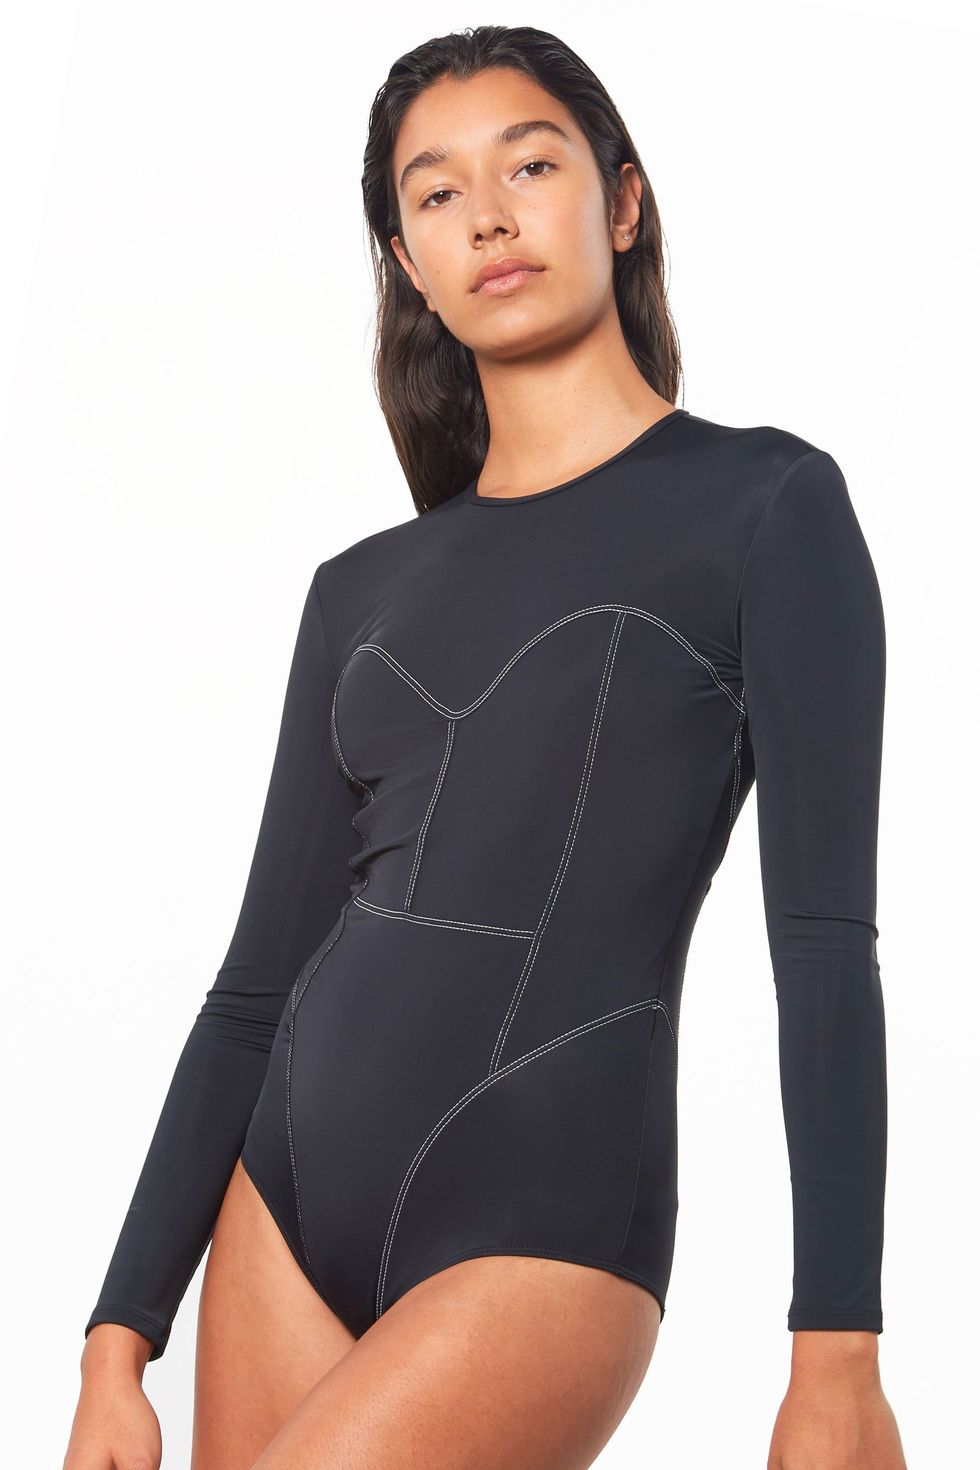 19 Best Long-Sleeve Swimsuits 2023 — Swimwear for Extra Coverage